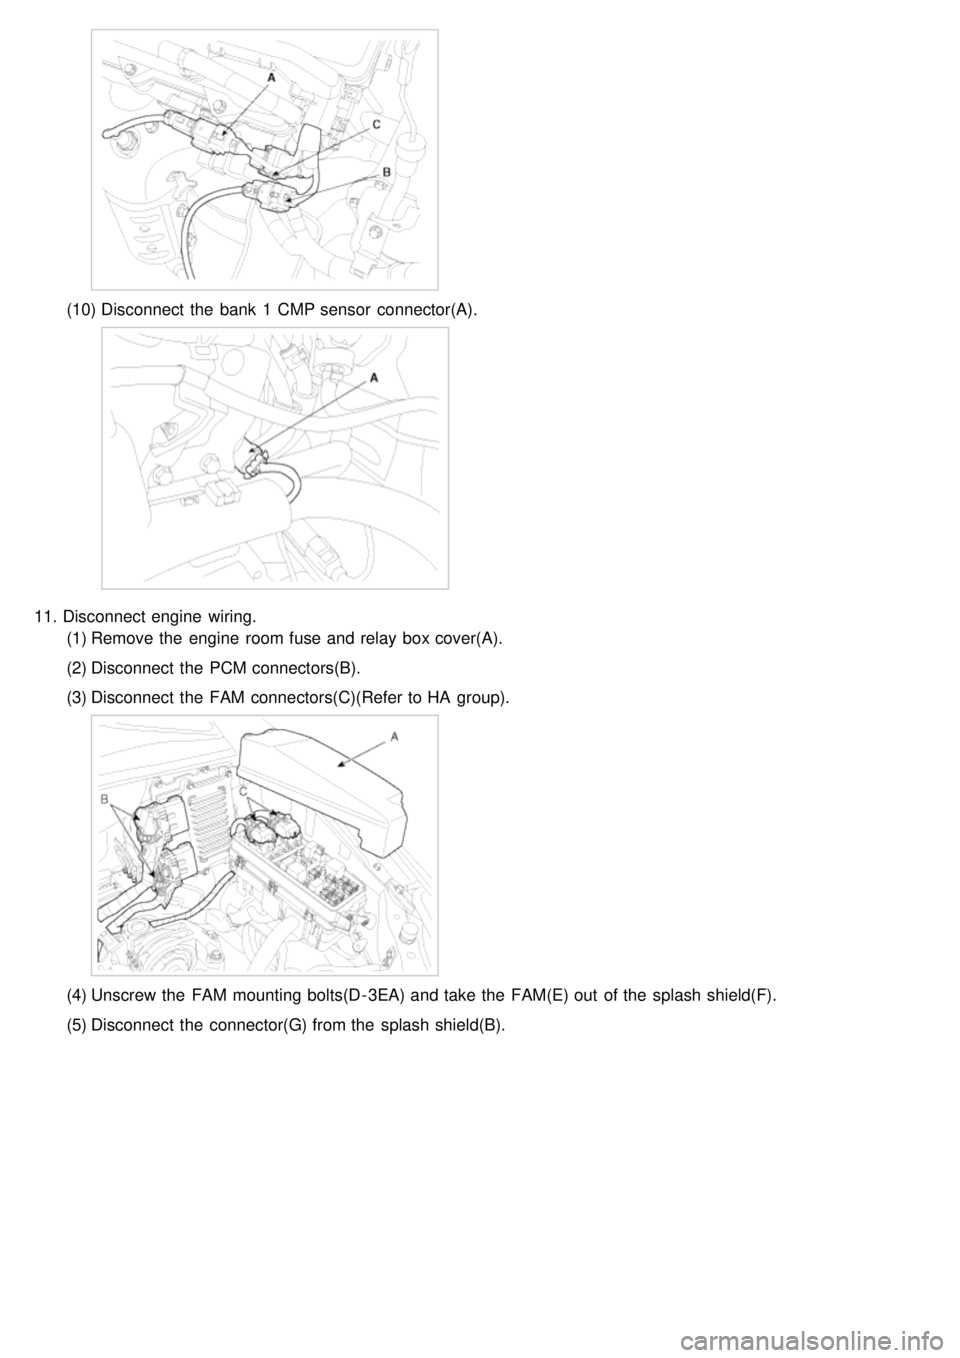 KIA CARNIVAL 2007 Repair Manual (10)Disconnect  the  bank  1  CMP sensor  connector(A).
11.Disconnect  engine  wiring.
(1) Remove the  engine  room fuse and relay  box cover(A).
(2) Disconnect  the  PCM connectors(B).
(3) Disconnect